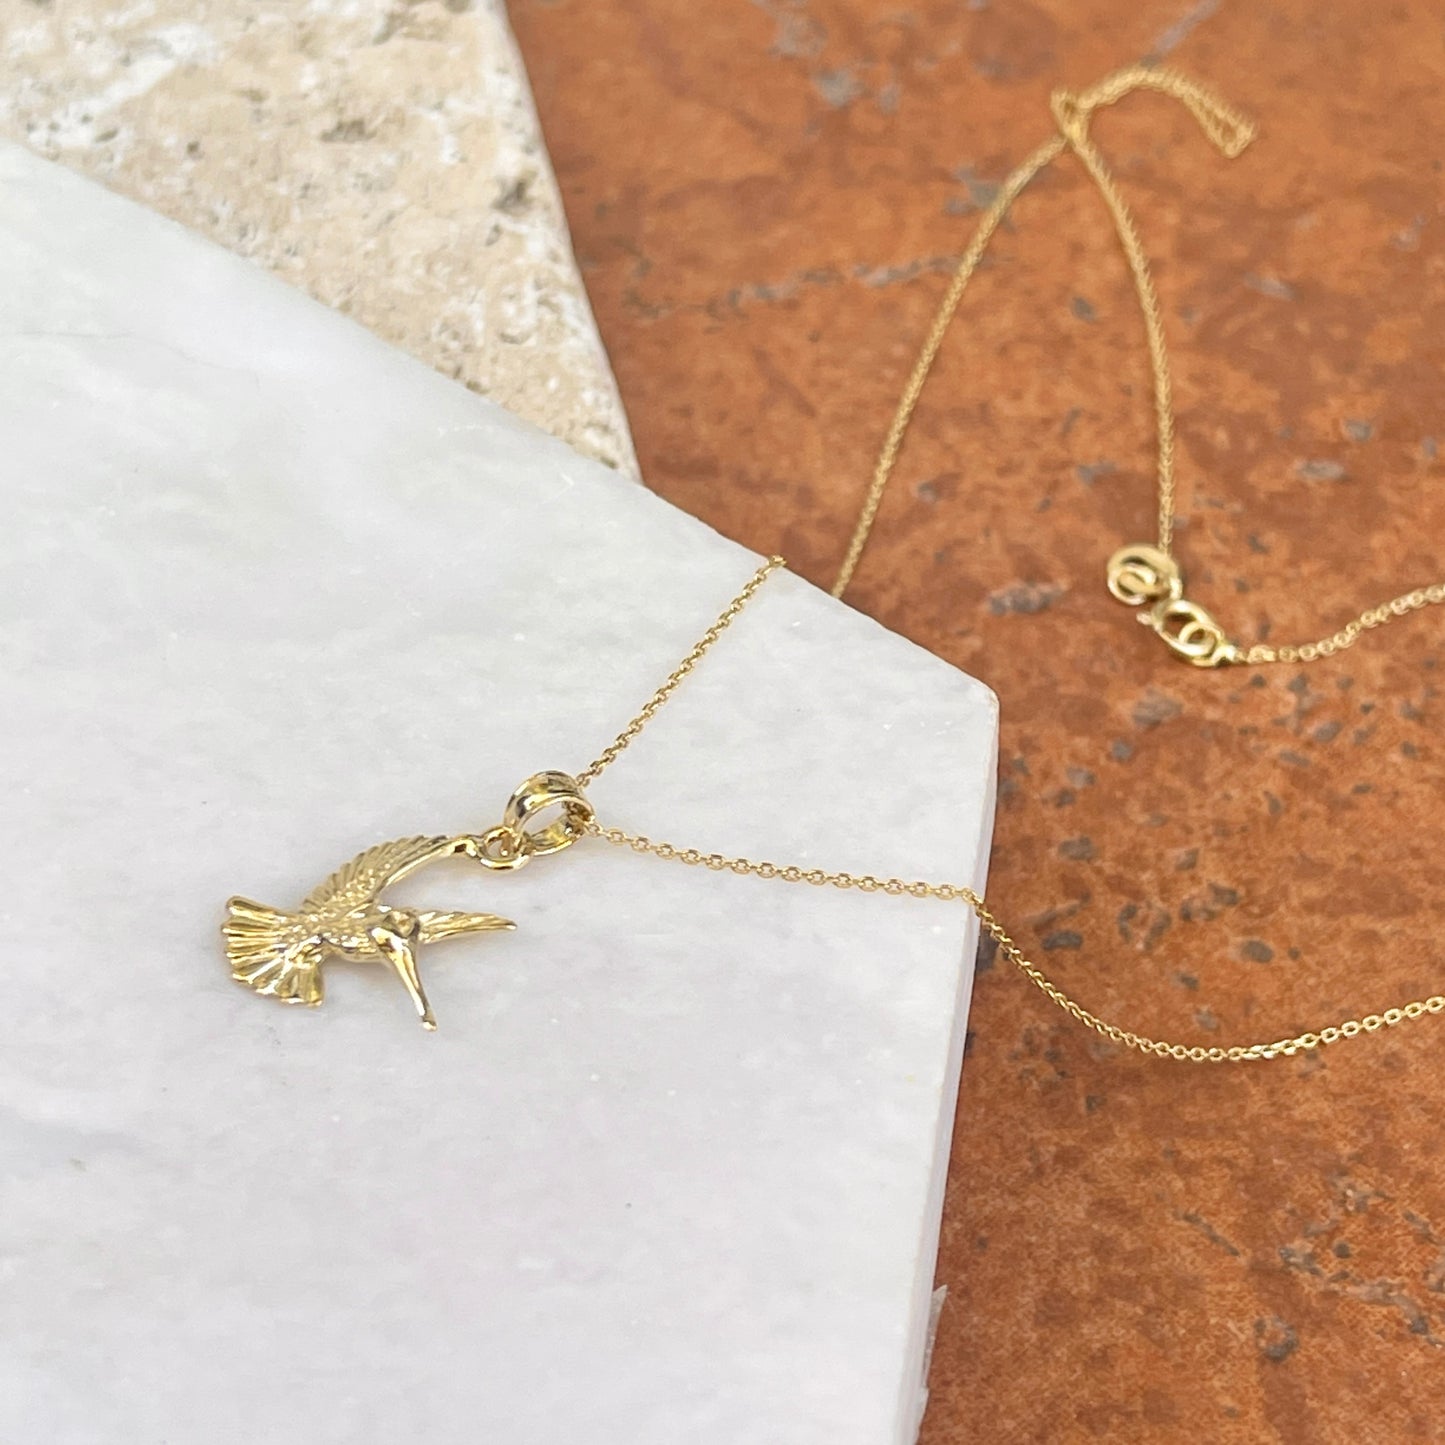 14KT Yellow Gold Flying Hummingbird Pendant Chain Necklace